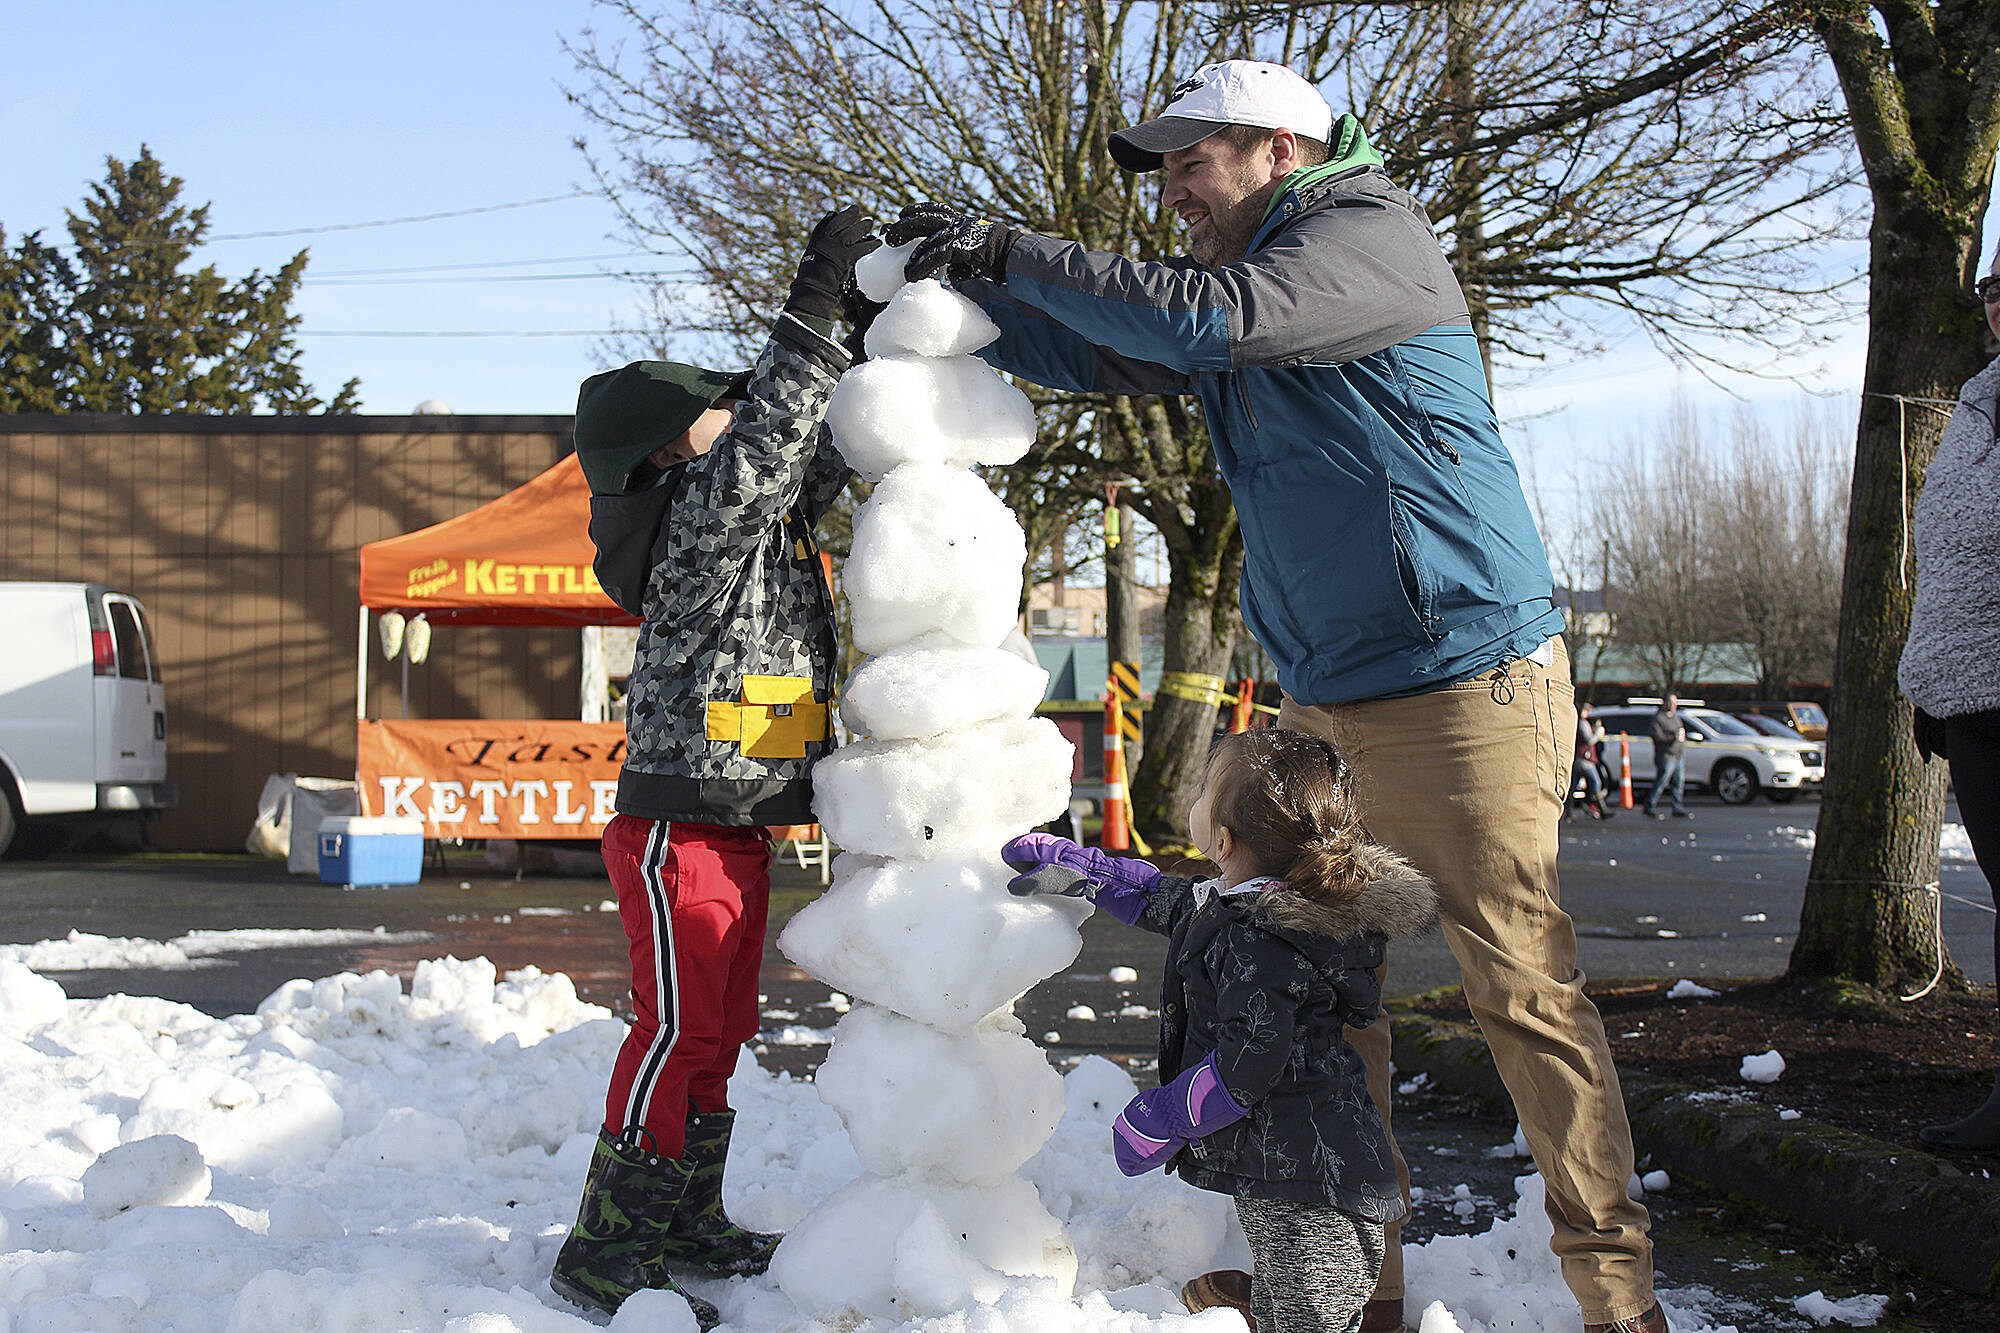 Pictured are kids and families enjoying last year's snow play day. Photos by Ray Miller-Still